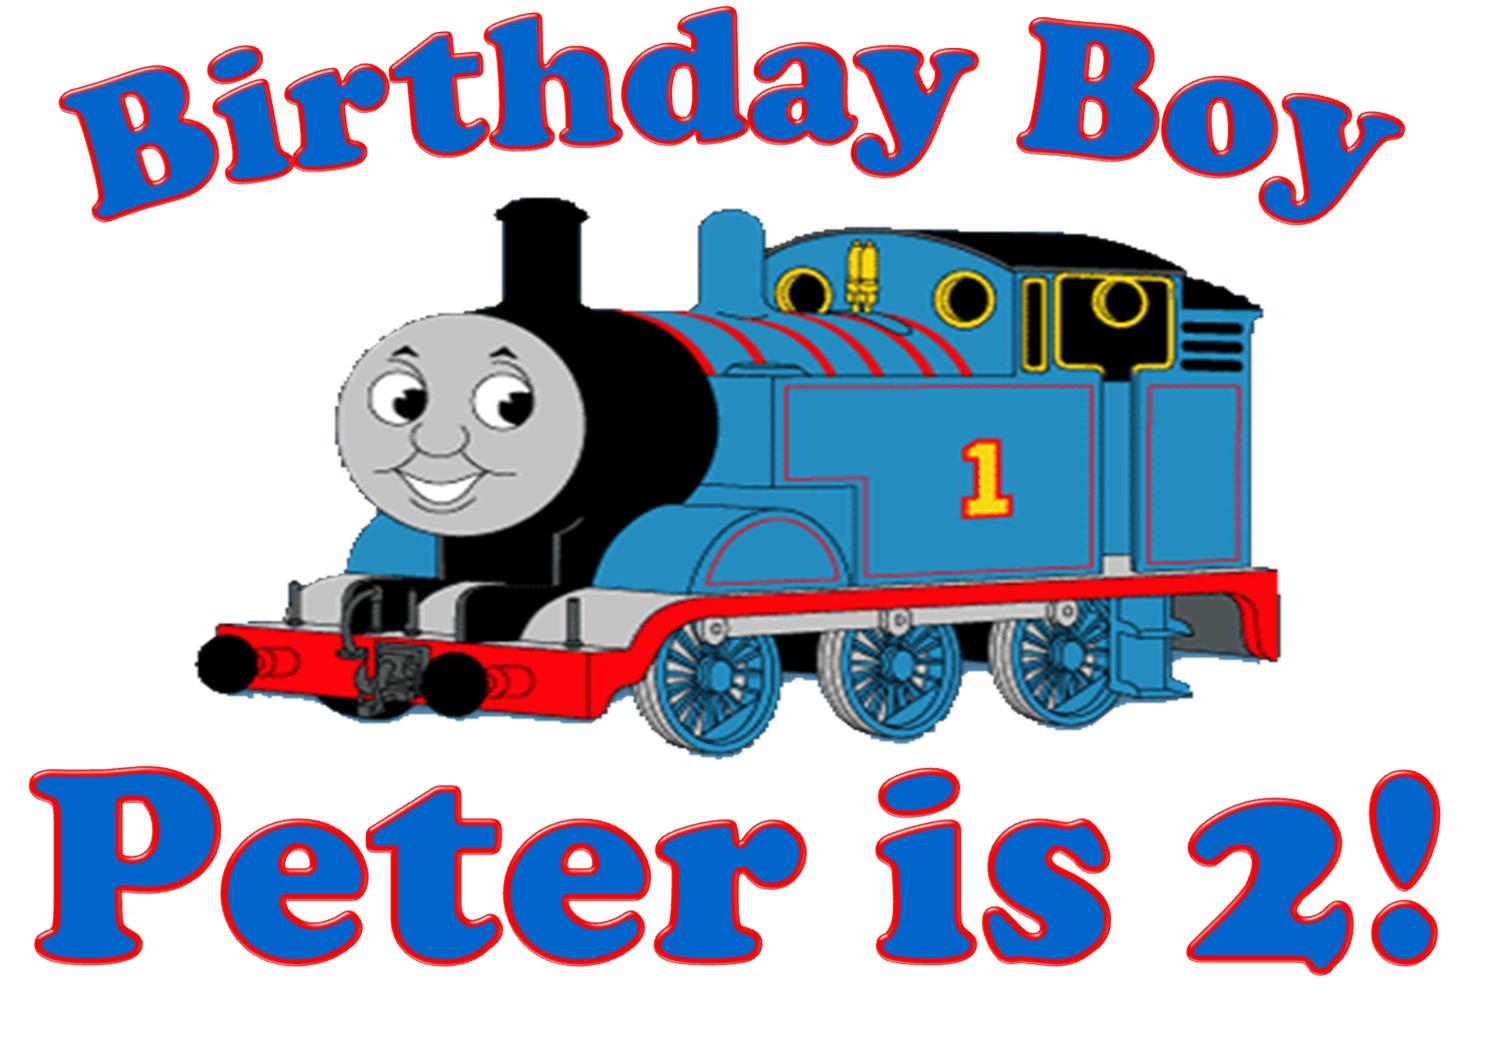 INSTANT DOWNLOAD Thomas The Train Birthday Number 3 Applique Design